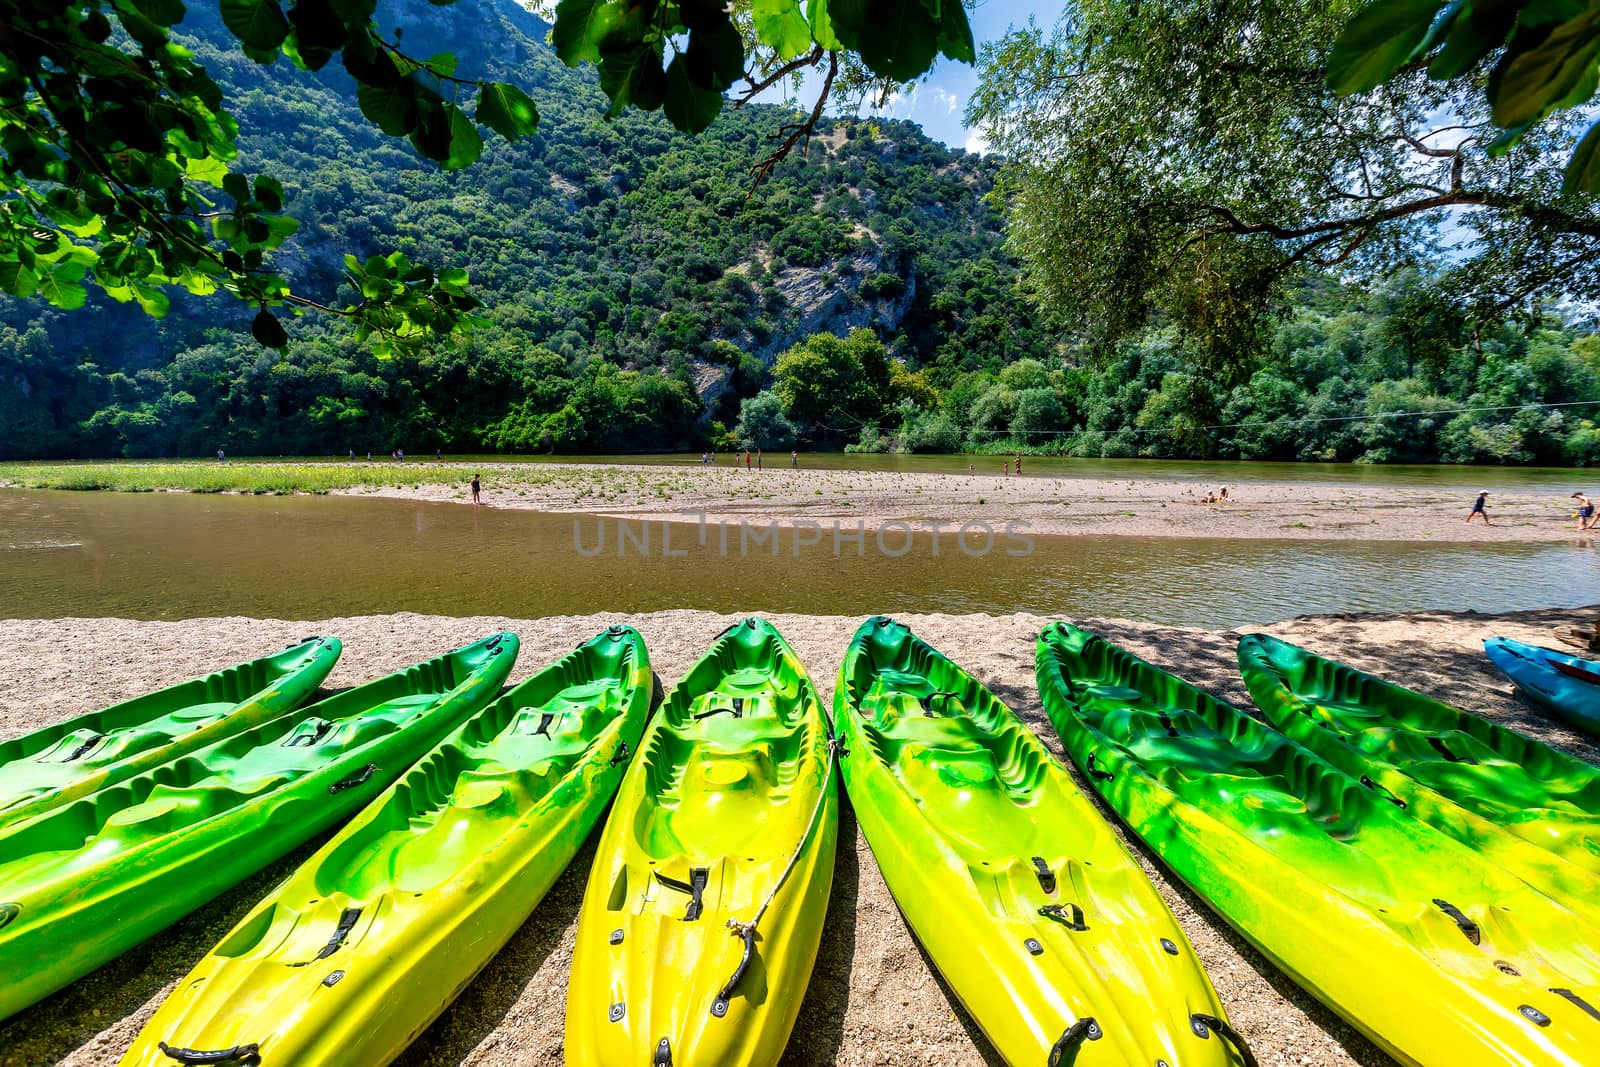 kayak parked on the shore of a beautiful beach of the river Nest by ververidis